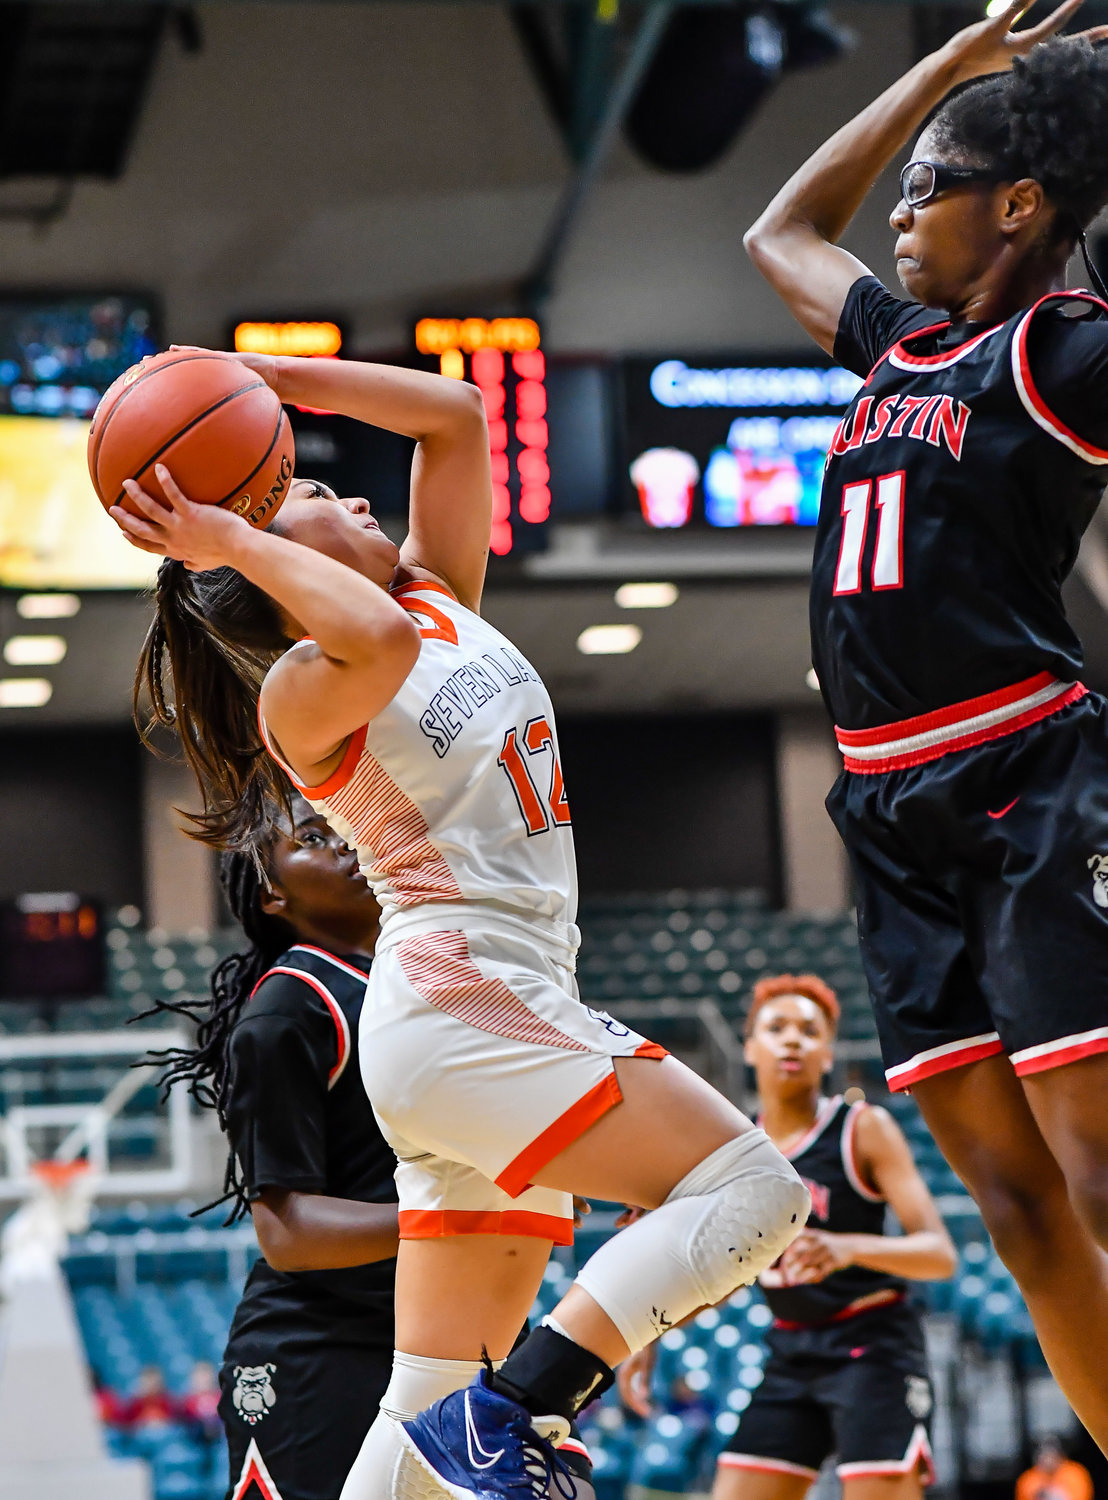 Katy Tx. Feb 22, 2022:  Seven Lakes Cailyn Tucker #12 goes up for the shot during the Regional Quarterfinal playoff game, Seven Lakes vs Fort Bend Austin at the Merrell Center. (Photo by Mark Goodman / Katy Times)